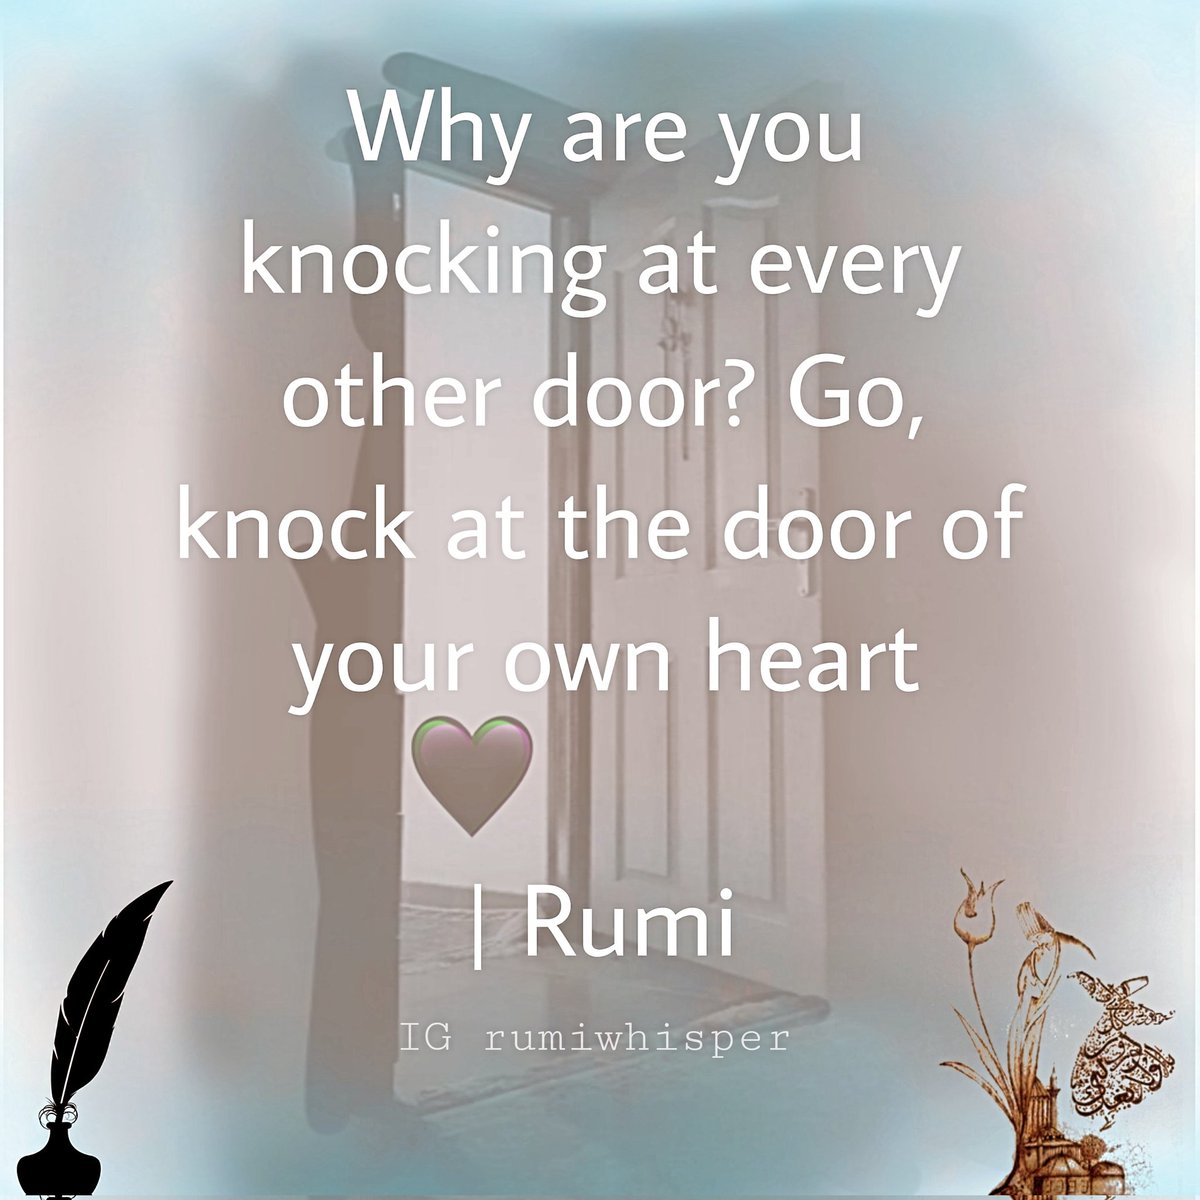 'Why are you knocking every other door? Go knock at the door of your own heart.'
RUMI